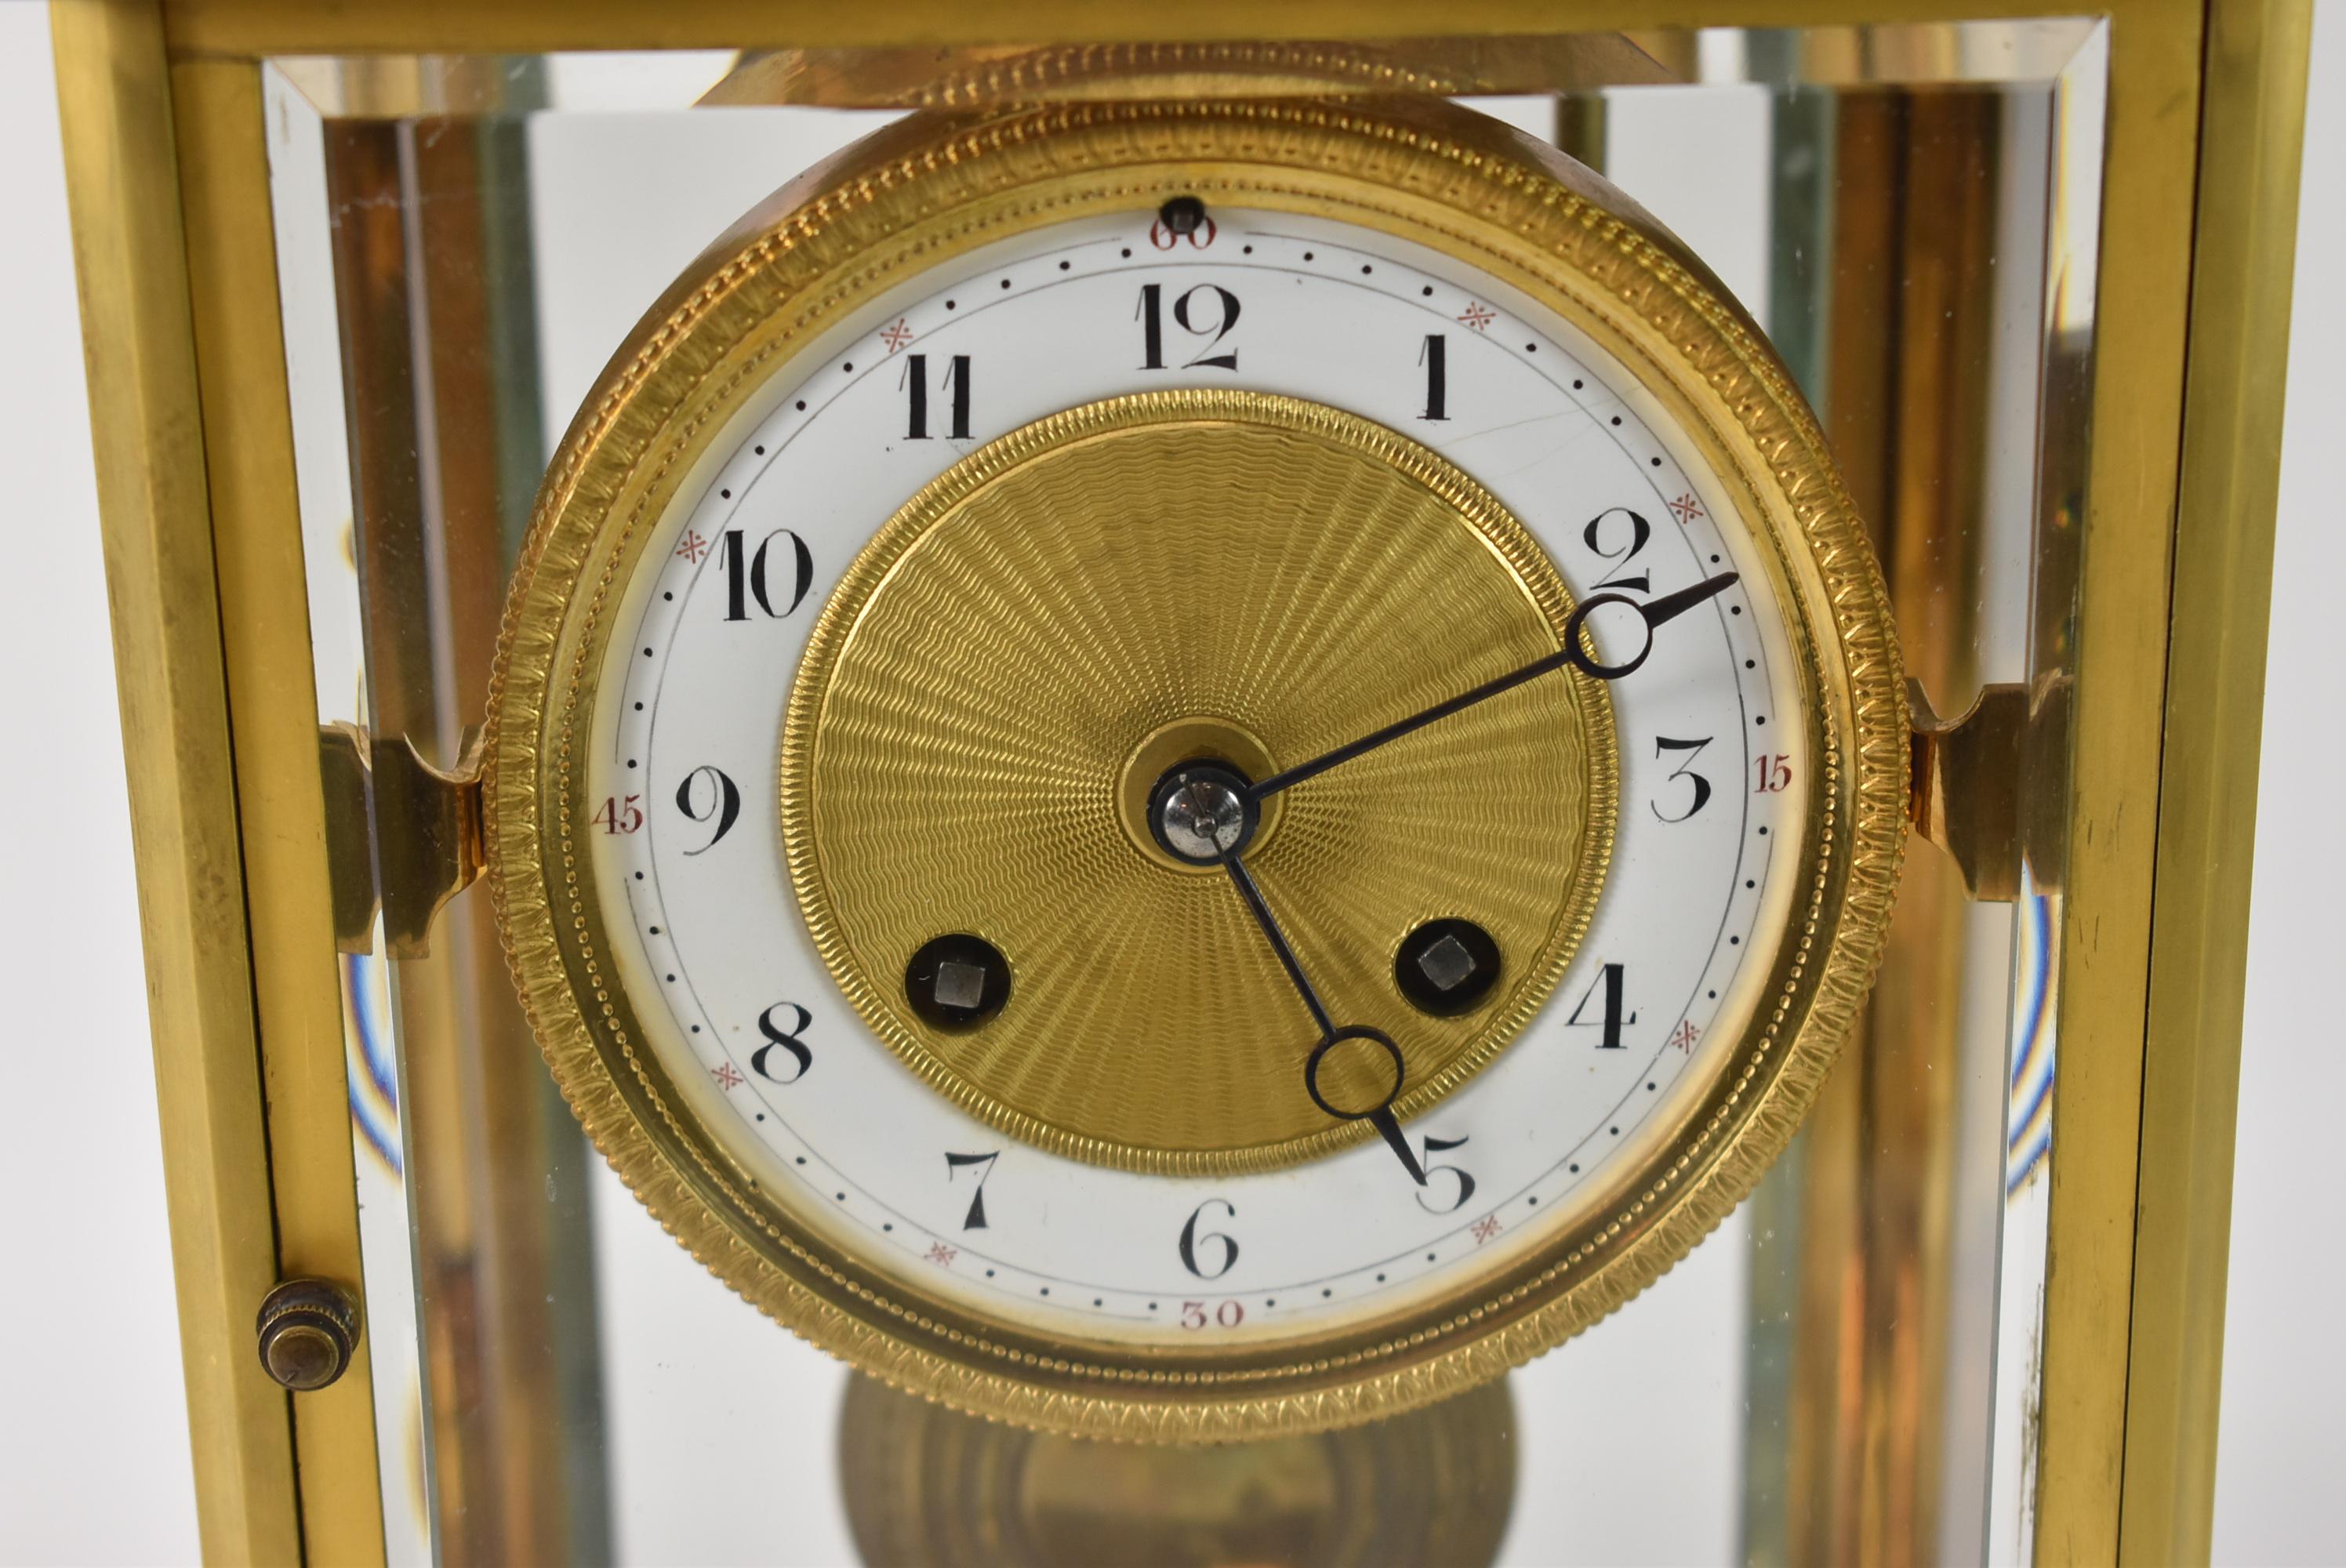 A beautiful brass clock with gold dore finish. Beveled glass panels with a porcelain dial and time and strike. French works. Running condition. Corner crack in one glass panel.